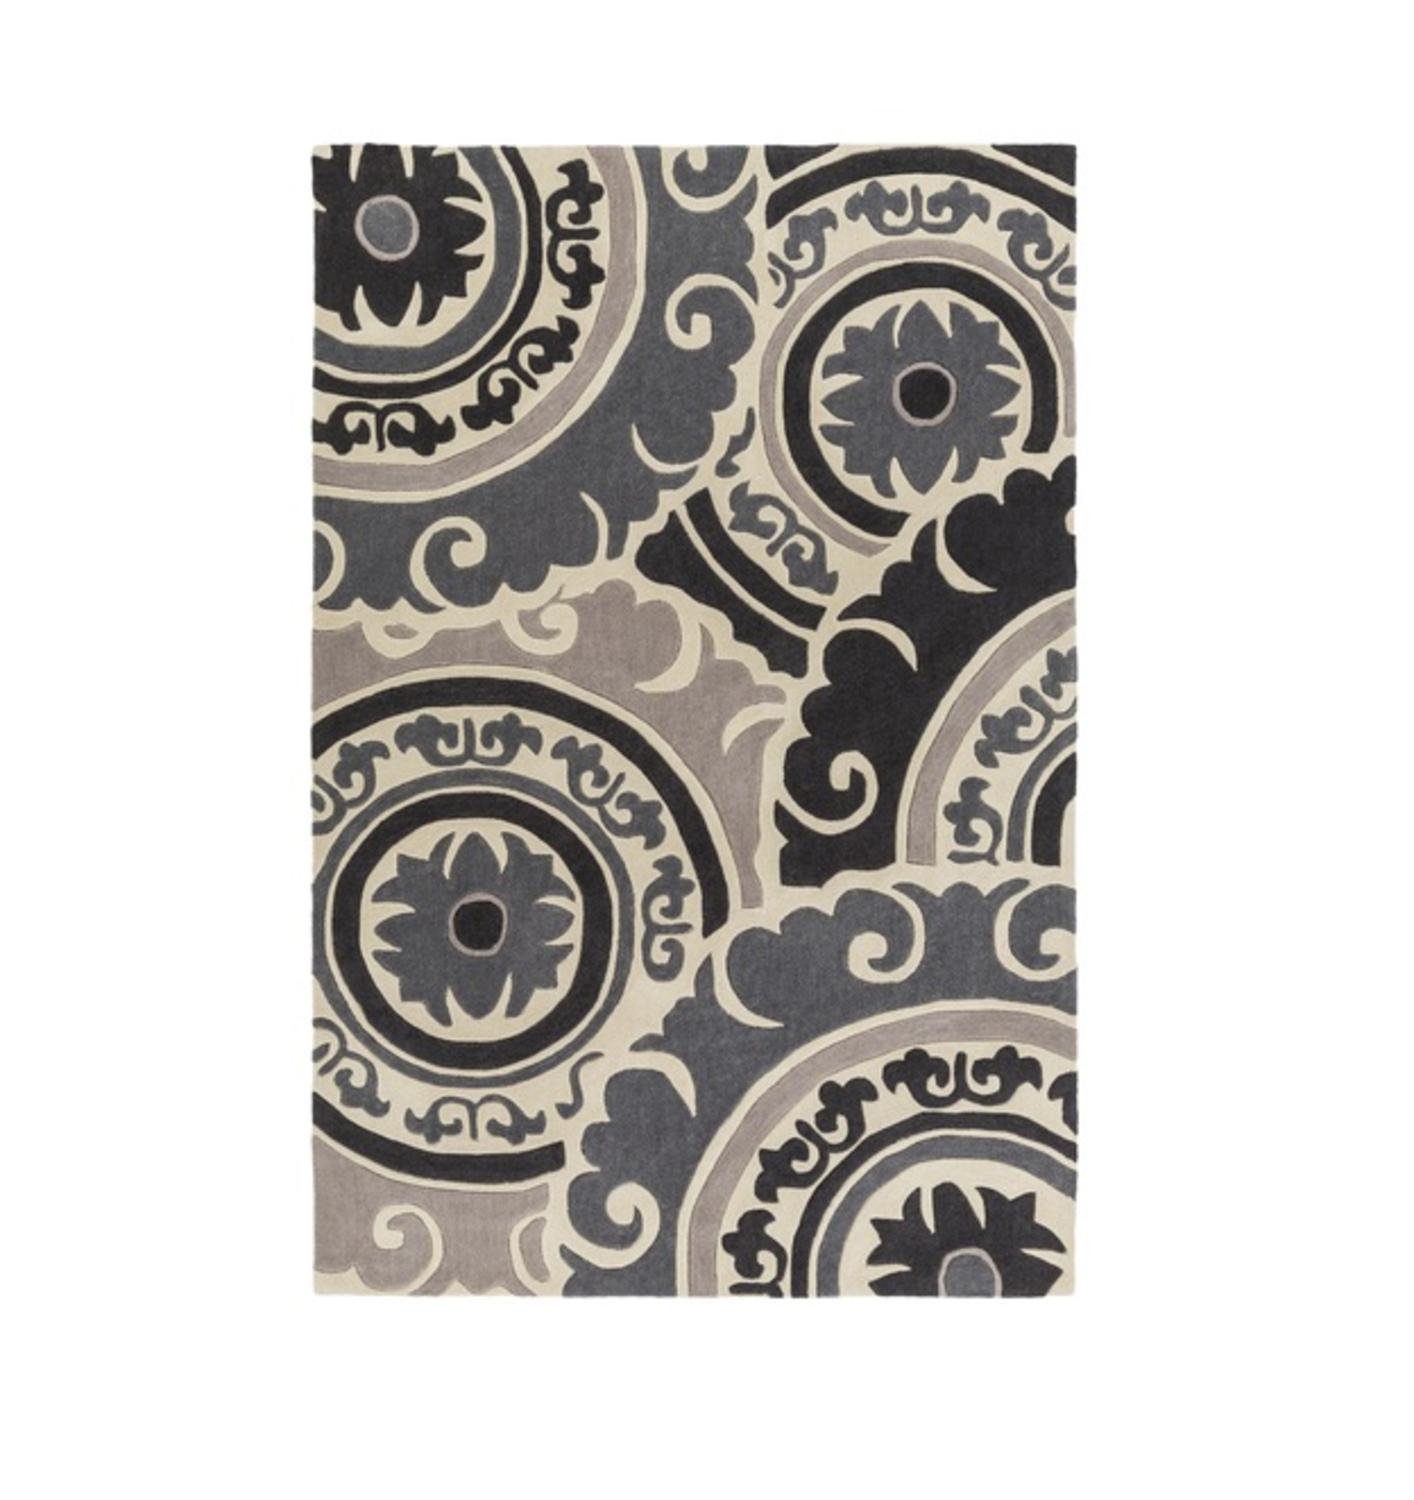 Diva At Home 9' x 13' Vintage Wheels Granite and Gunmetal Gray Hand Tufted Area Throw Rug